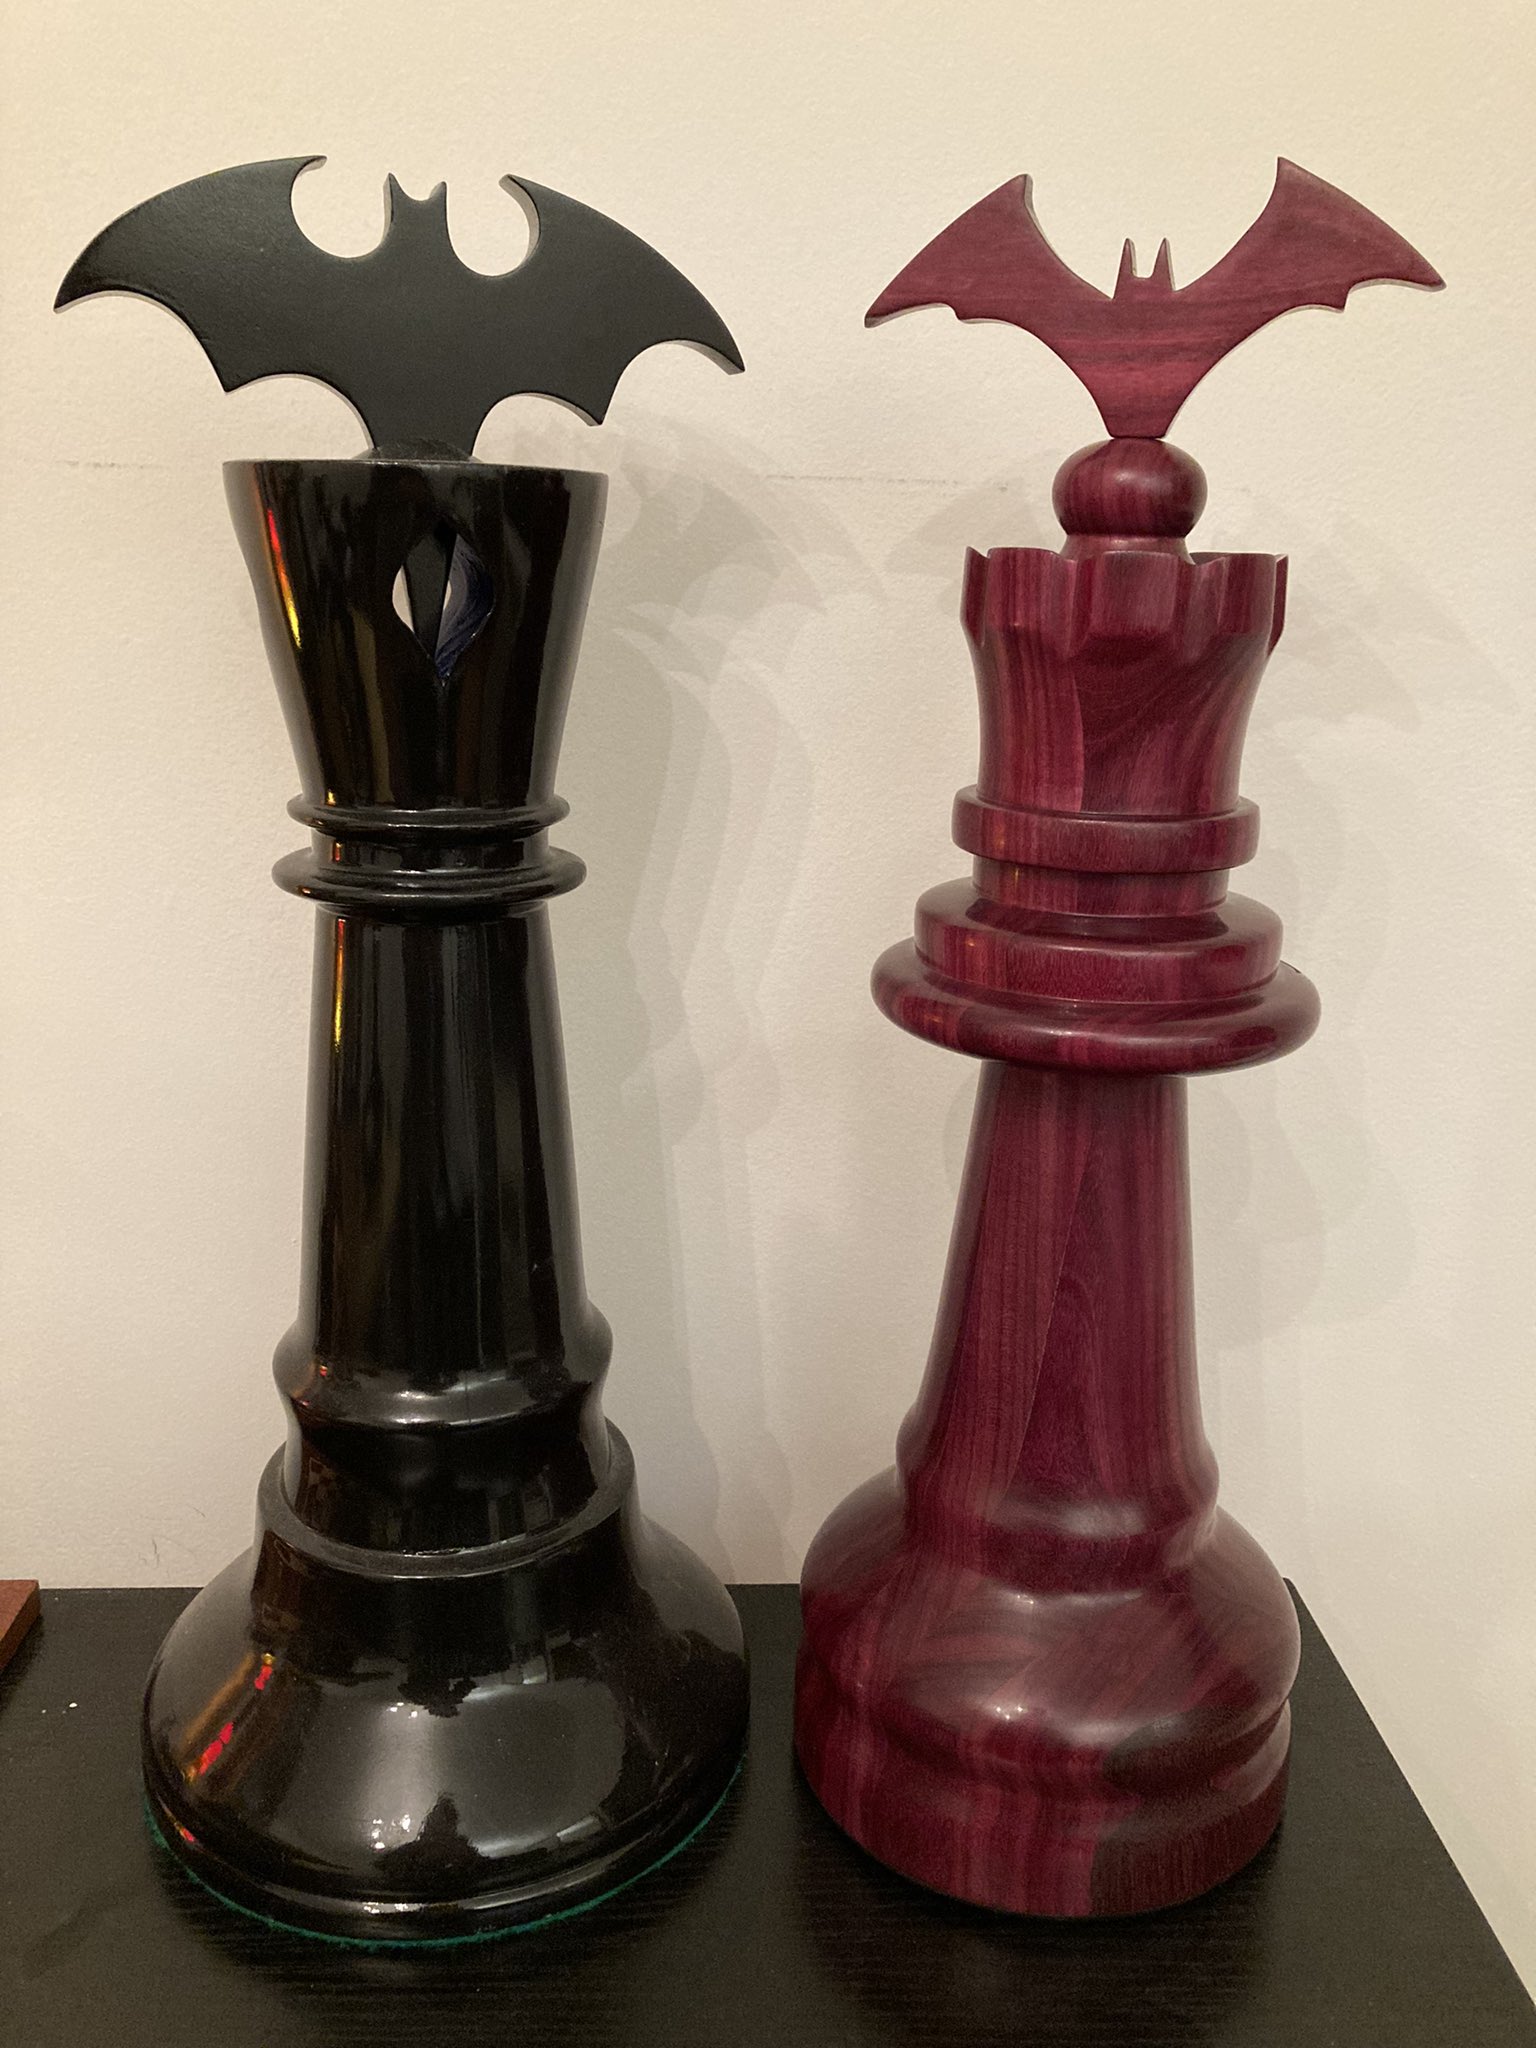 GothamChess on X: This is incredible. A fan built me a wooden chess king  with a detachable bat. Chess community is full of people spanning so many  walks of life ❤️  /